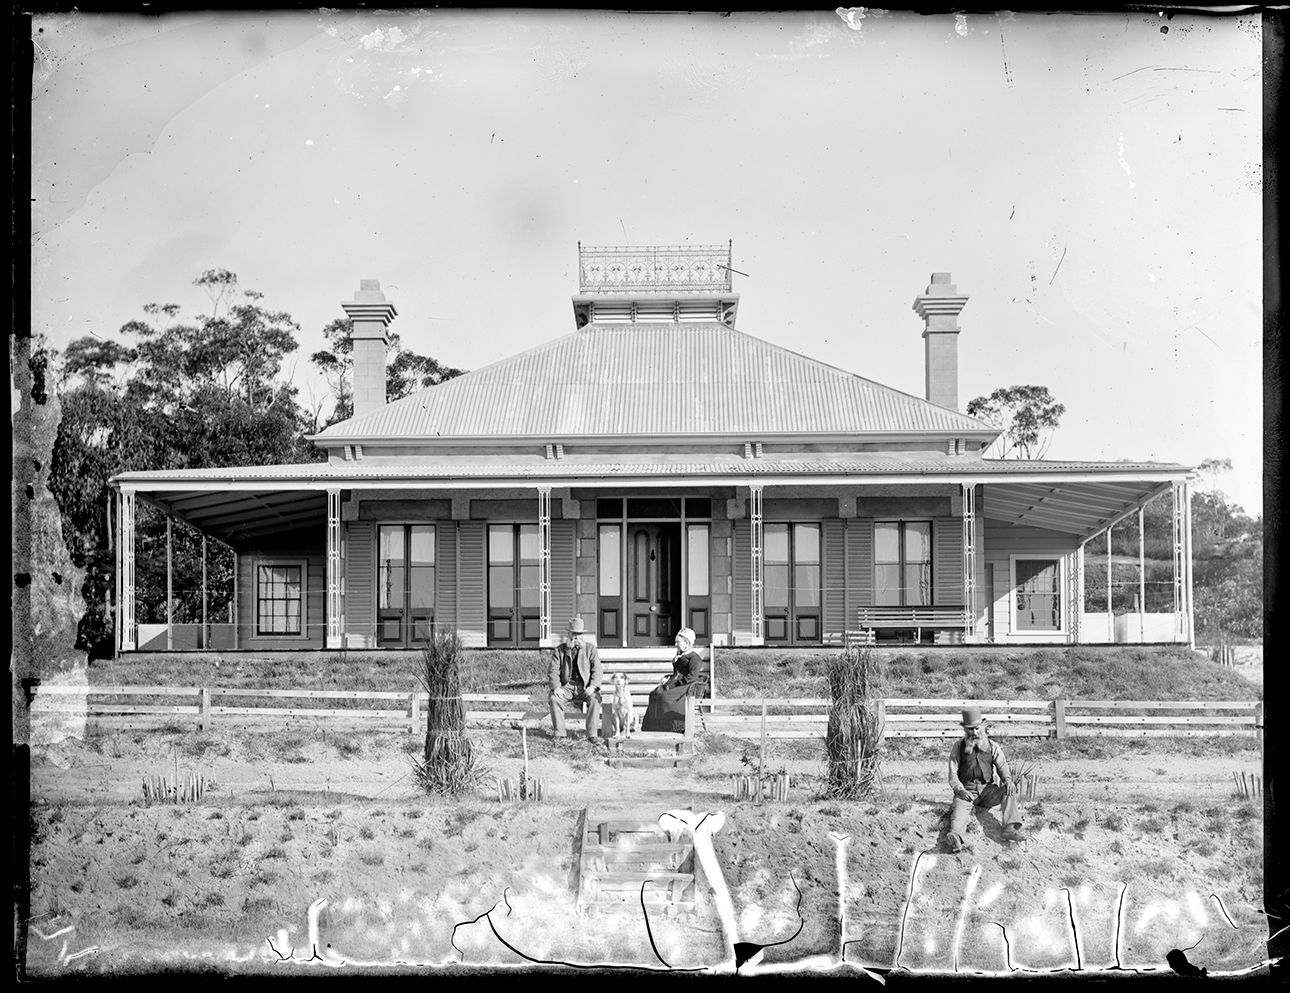 A man and woman sit at the foot of the stairs of a homestead with a wrap around verandah. A dog sits between them